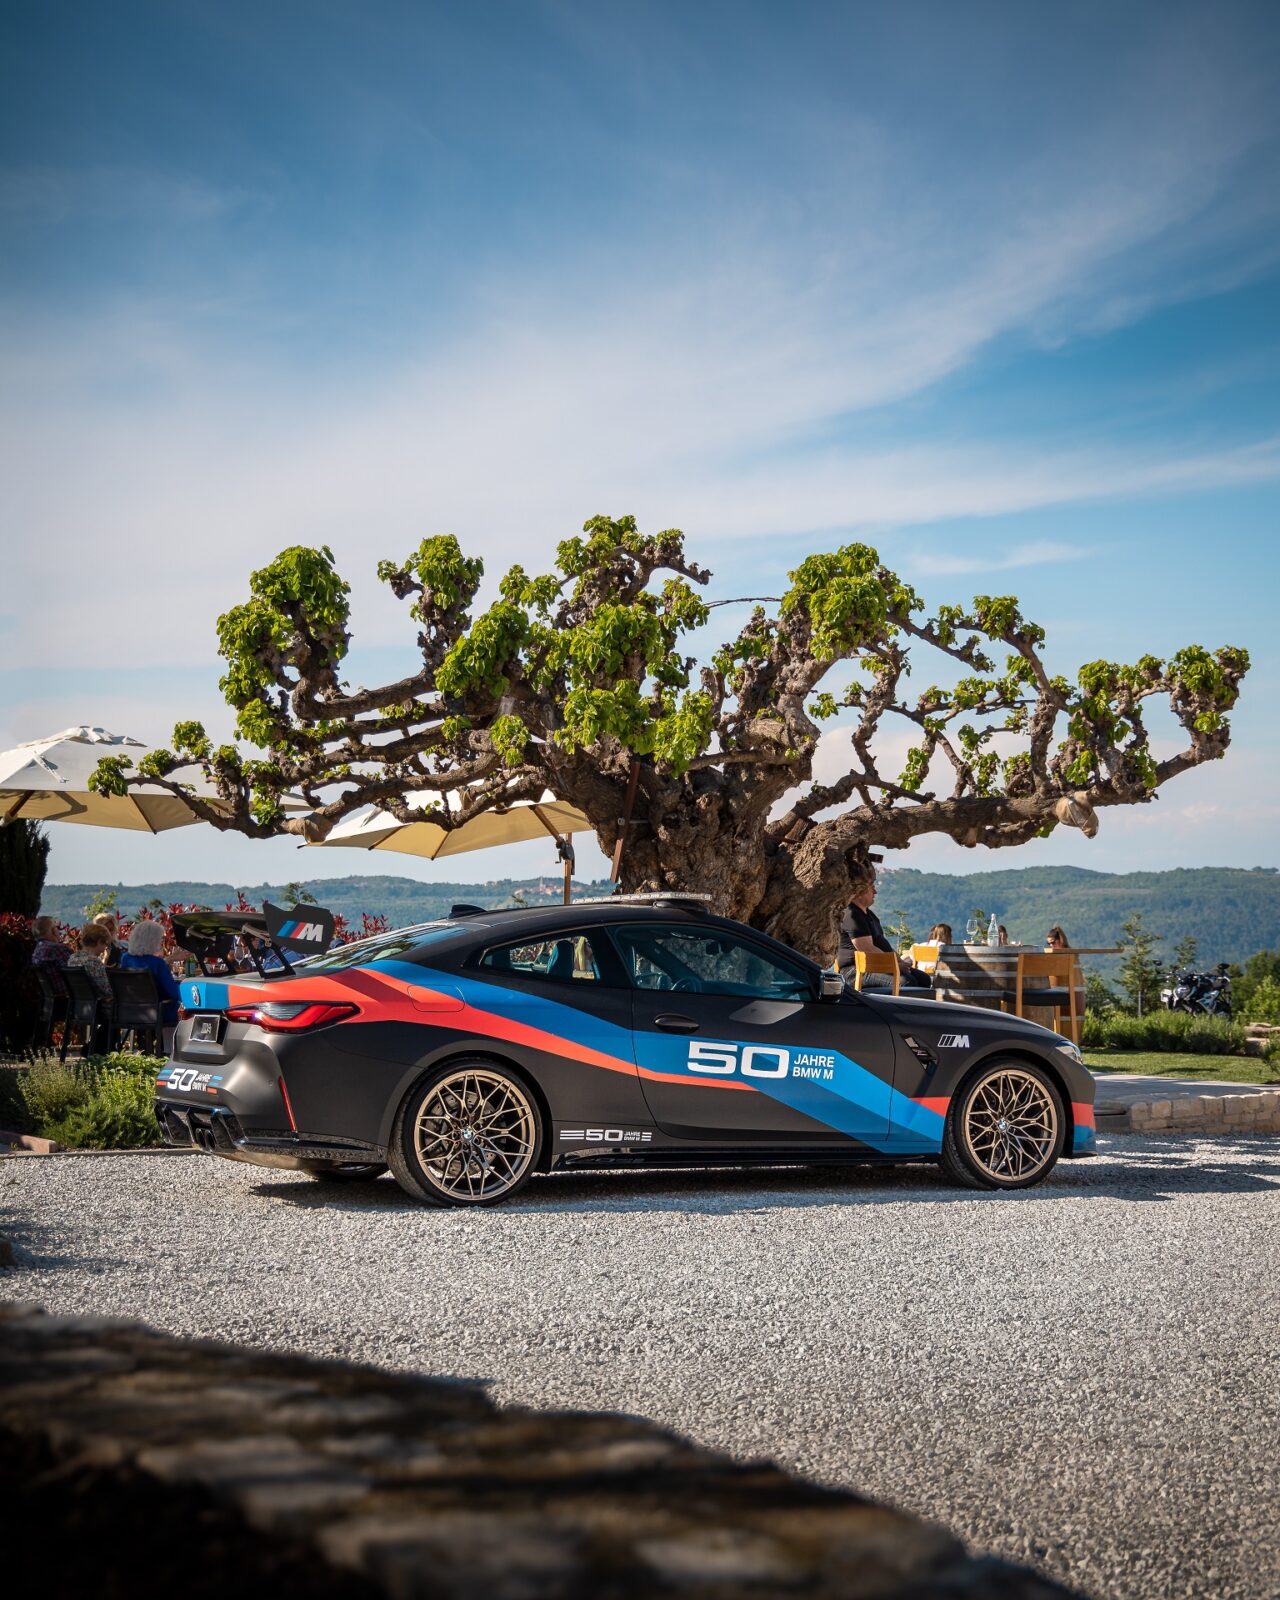 rossi_winery_legendary_moments_by_bmw (2)